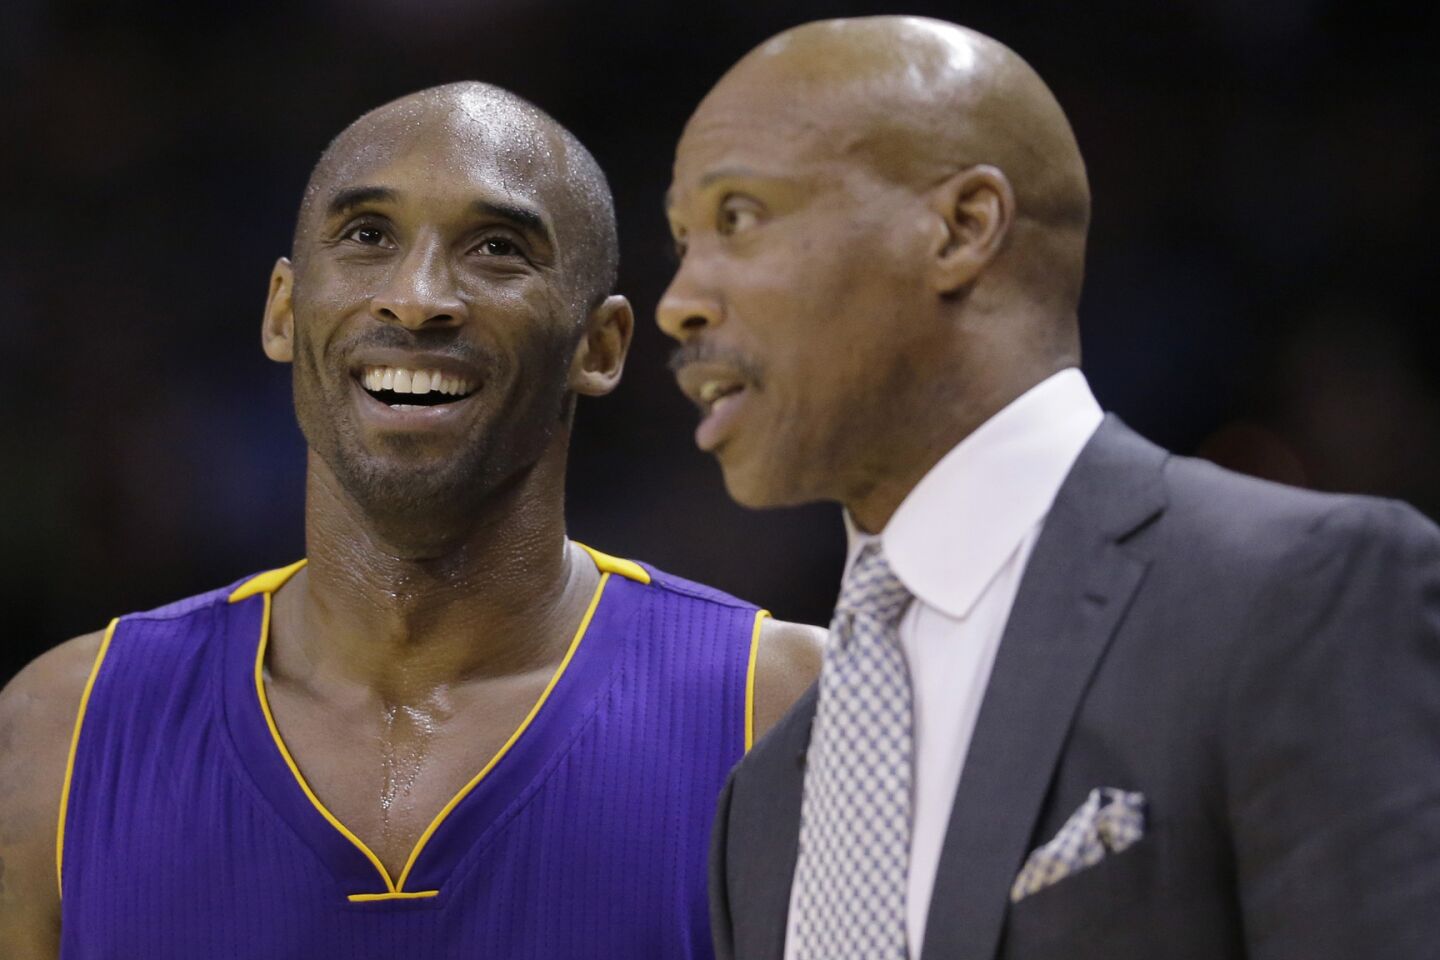 Byron Scott adds to the belief that this is Kobe Bryant's final NBA season